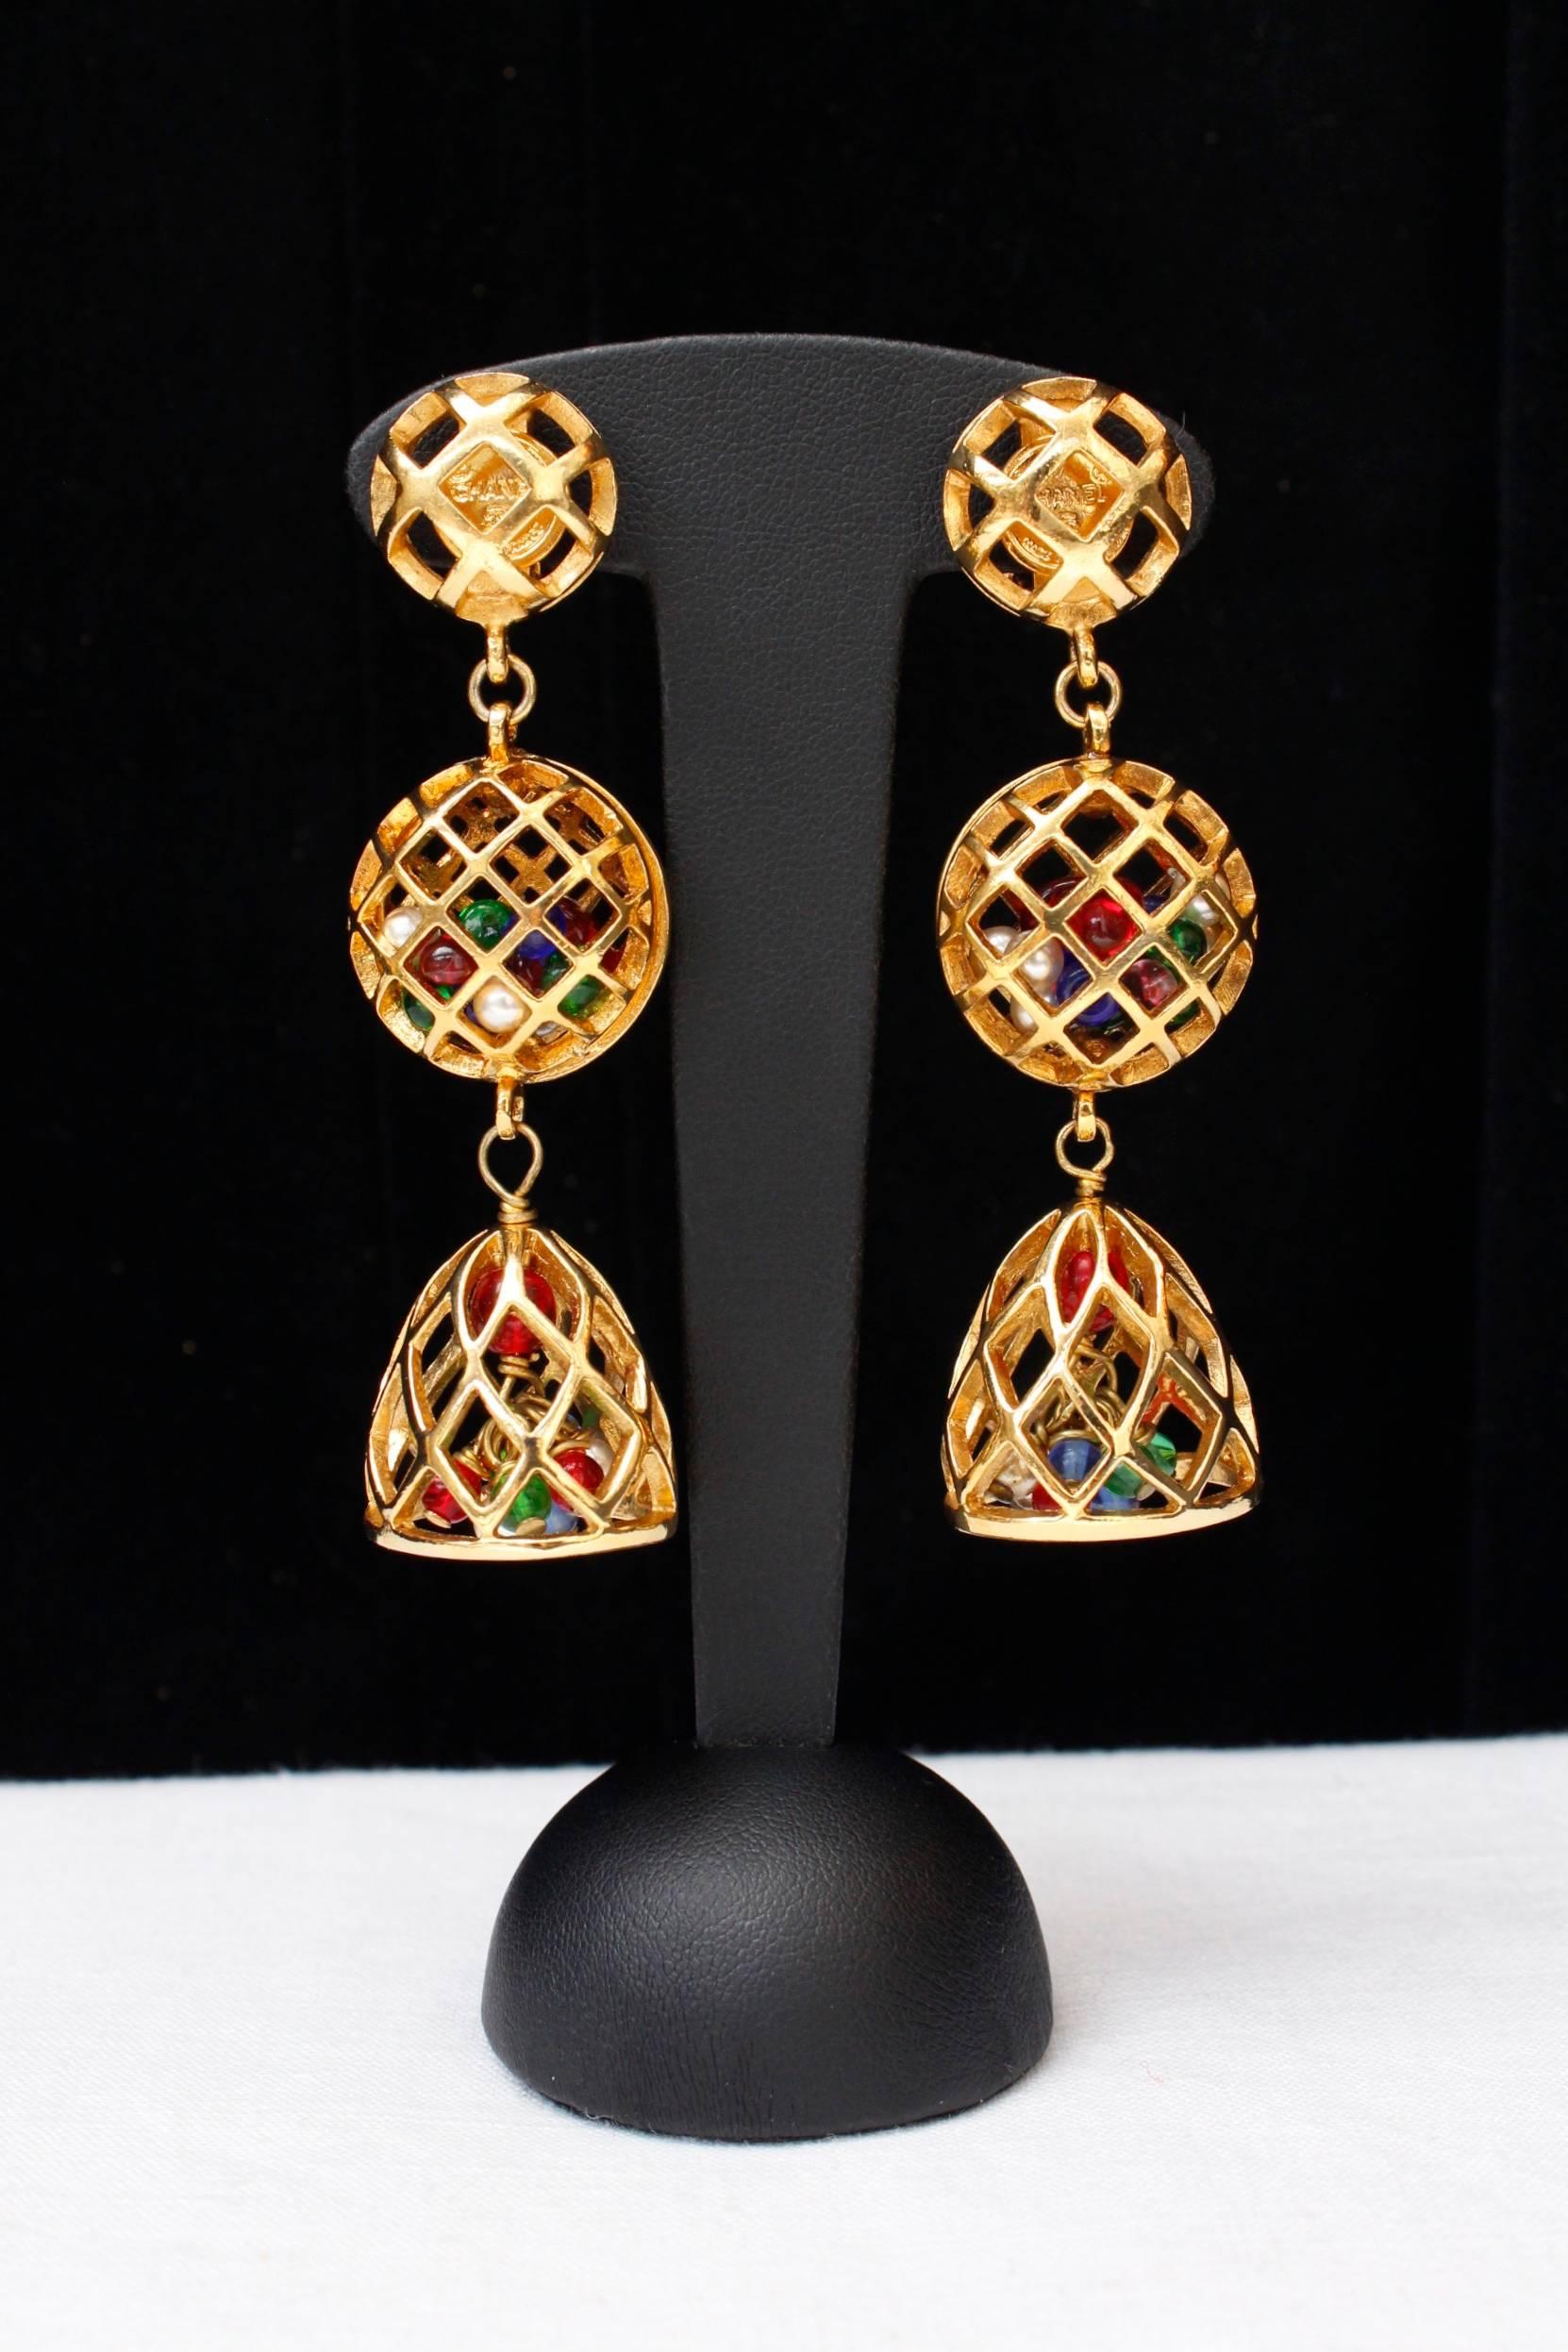 CHANEL (Made in France) pair of drop clip-on earrings composed of three gilded metal cages, including one in the shape of a bell. These cages are full of small red, green blue and pearly beads.

Signed on plate.

Circa late 1980s.

Very good